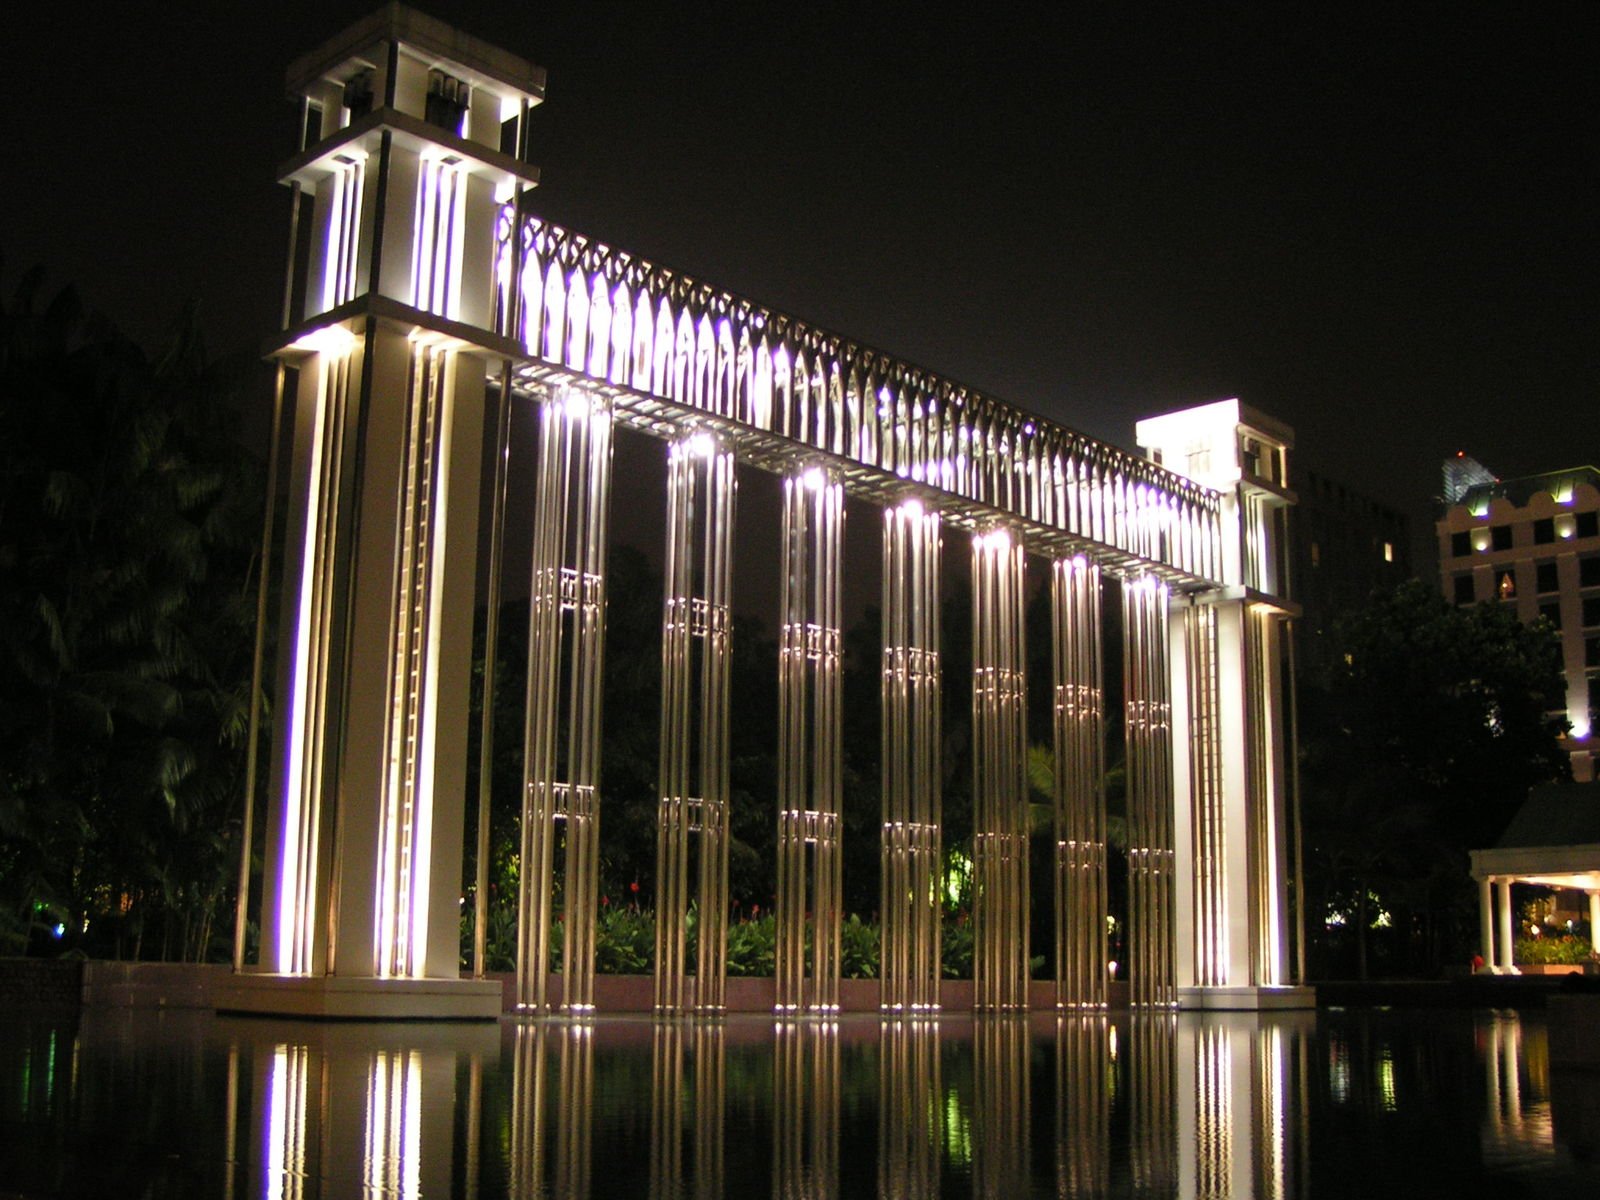 a large building made of metal poles is reflecting in the water